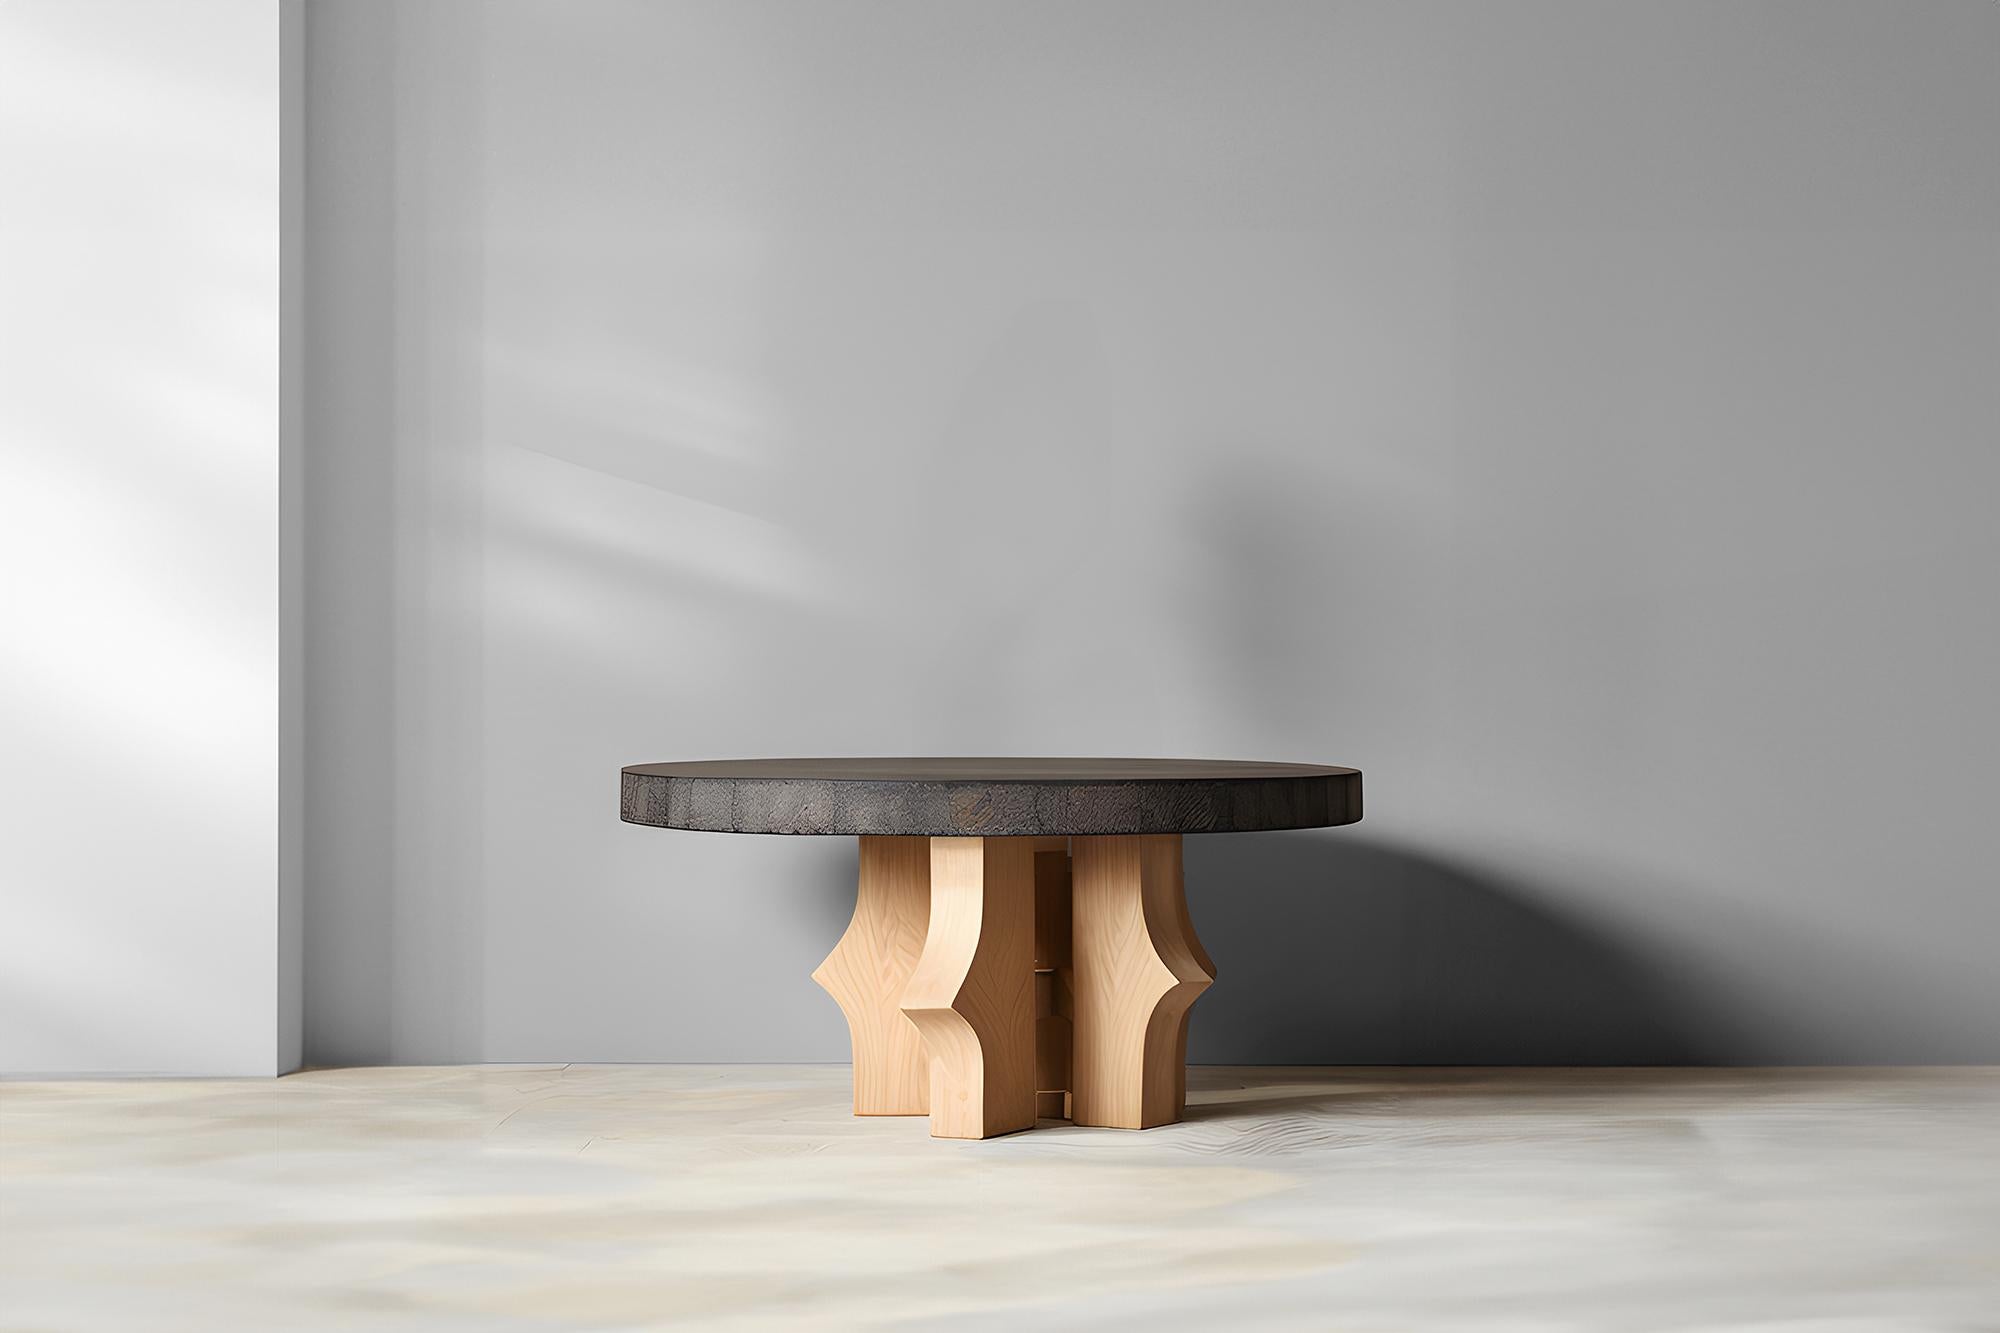 Round Fundamenta Coffee 51 Geometric Wood, Modern Appeal by NONO



Sculptural coffee table made of solid wood with a natural water-based or black tinted finish. Due to the nature of the production process, each piece may vary in grain, texture,